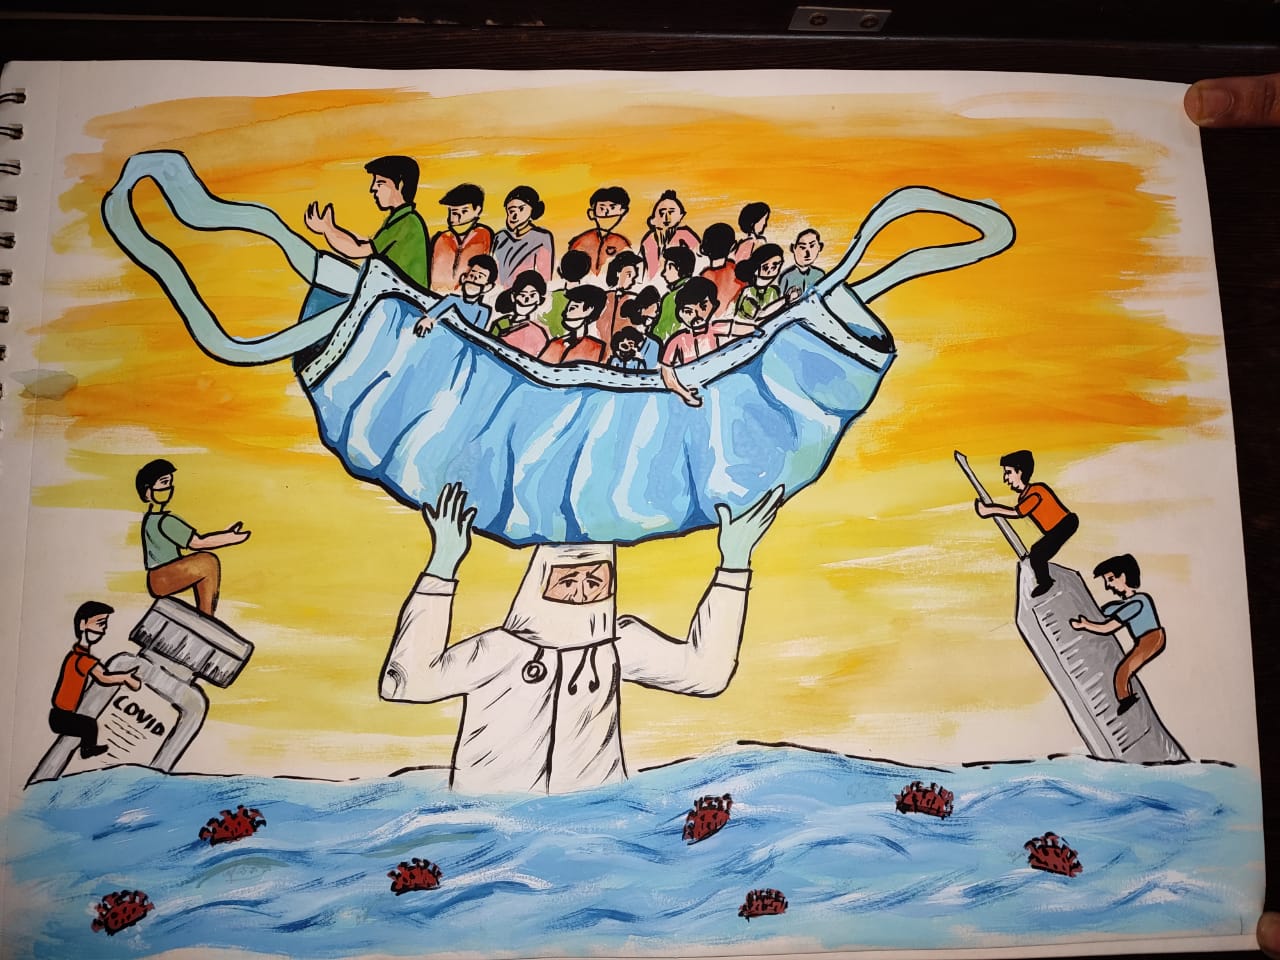 Painting prepared by Mr. Siddhesh Mali. (IV B.P.O) for creating awareness about Covid-19 Pandemic and potrating the struggle of front line Health Care workers.